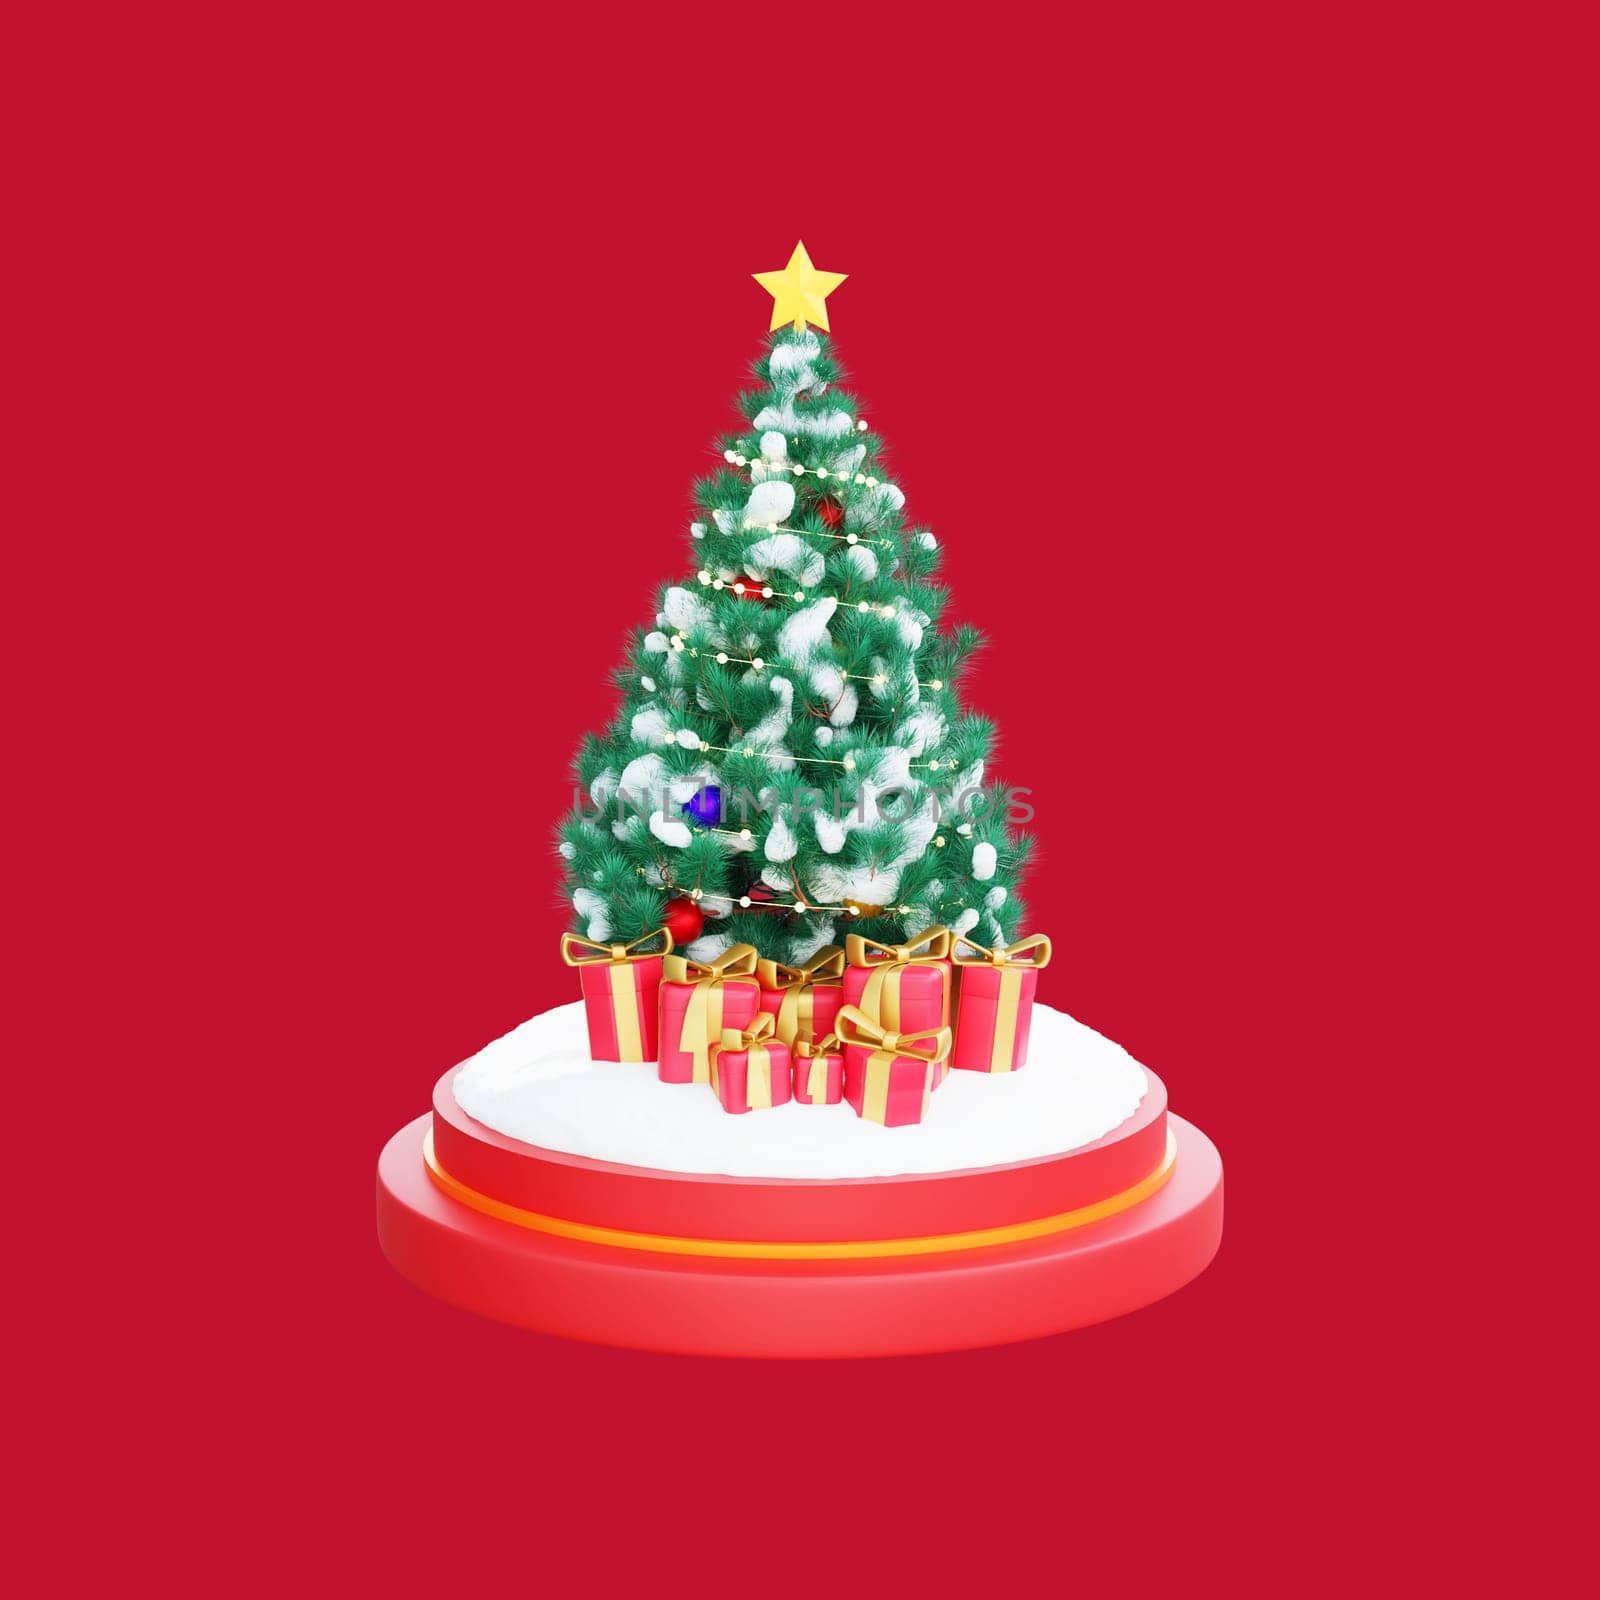 3D illustration of a Christmas tree adorned with colorful baubles and a yellow star, surrounded by an array of beautifully wrapped presents. Perfect for Christmas and Happy New Year celebrations